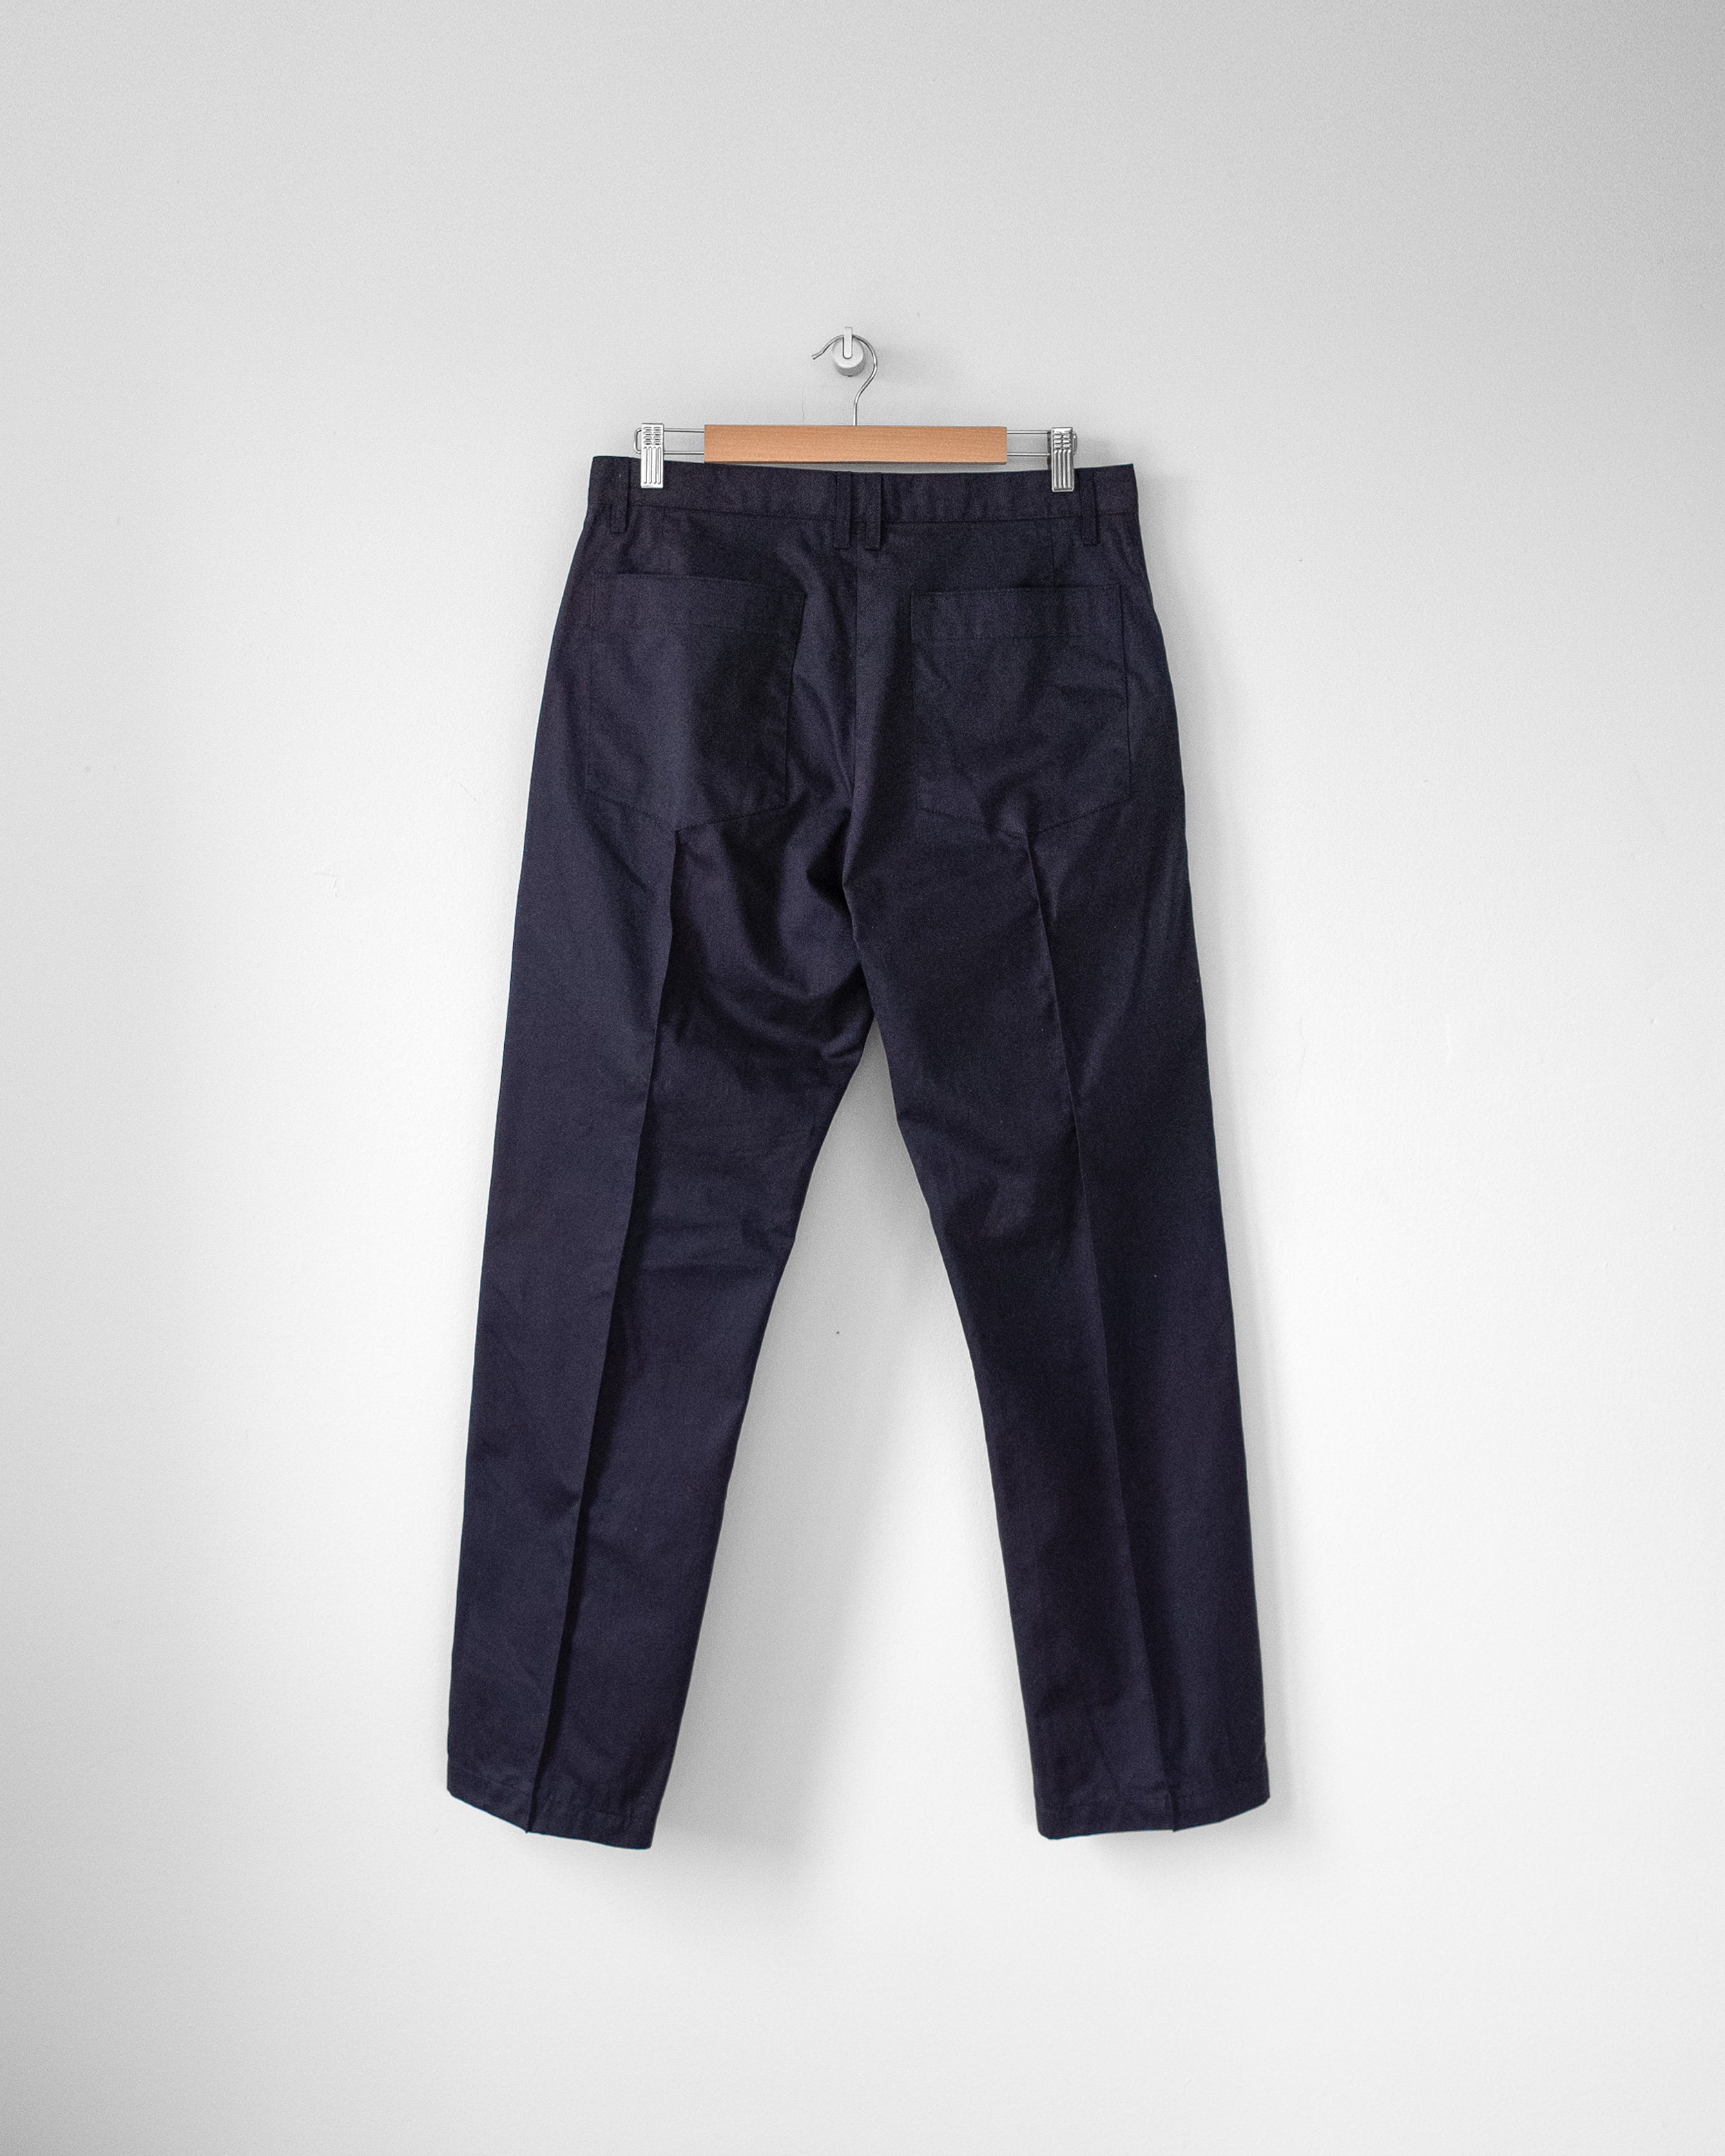 Stitched Crease Trouser - Navy Cotton Sateen - James Coward